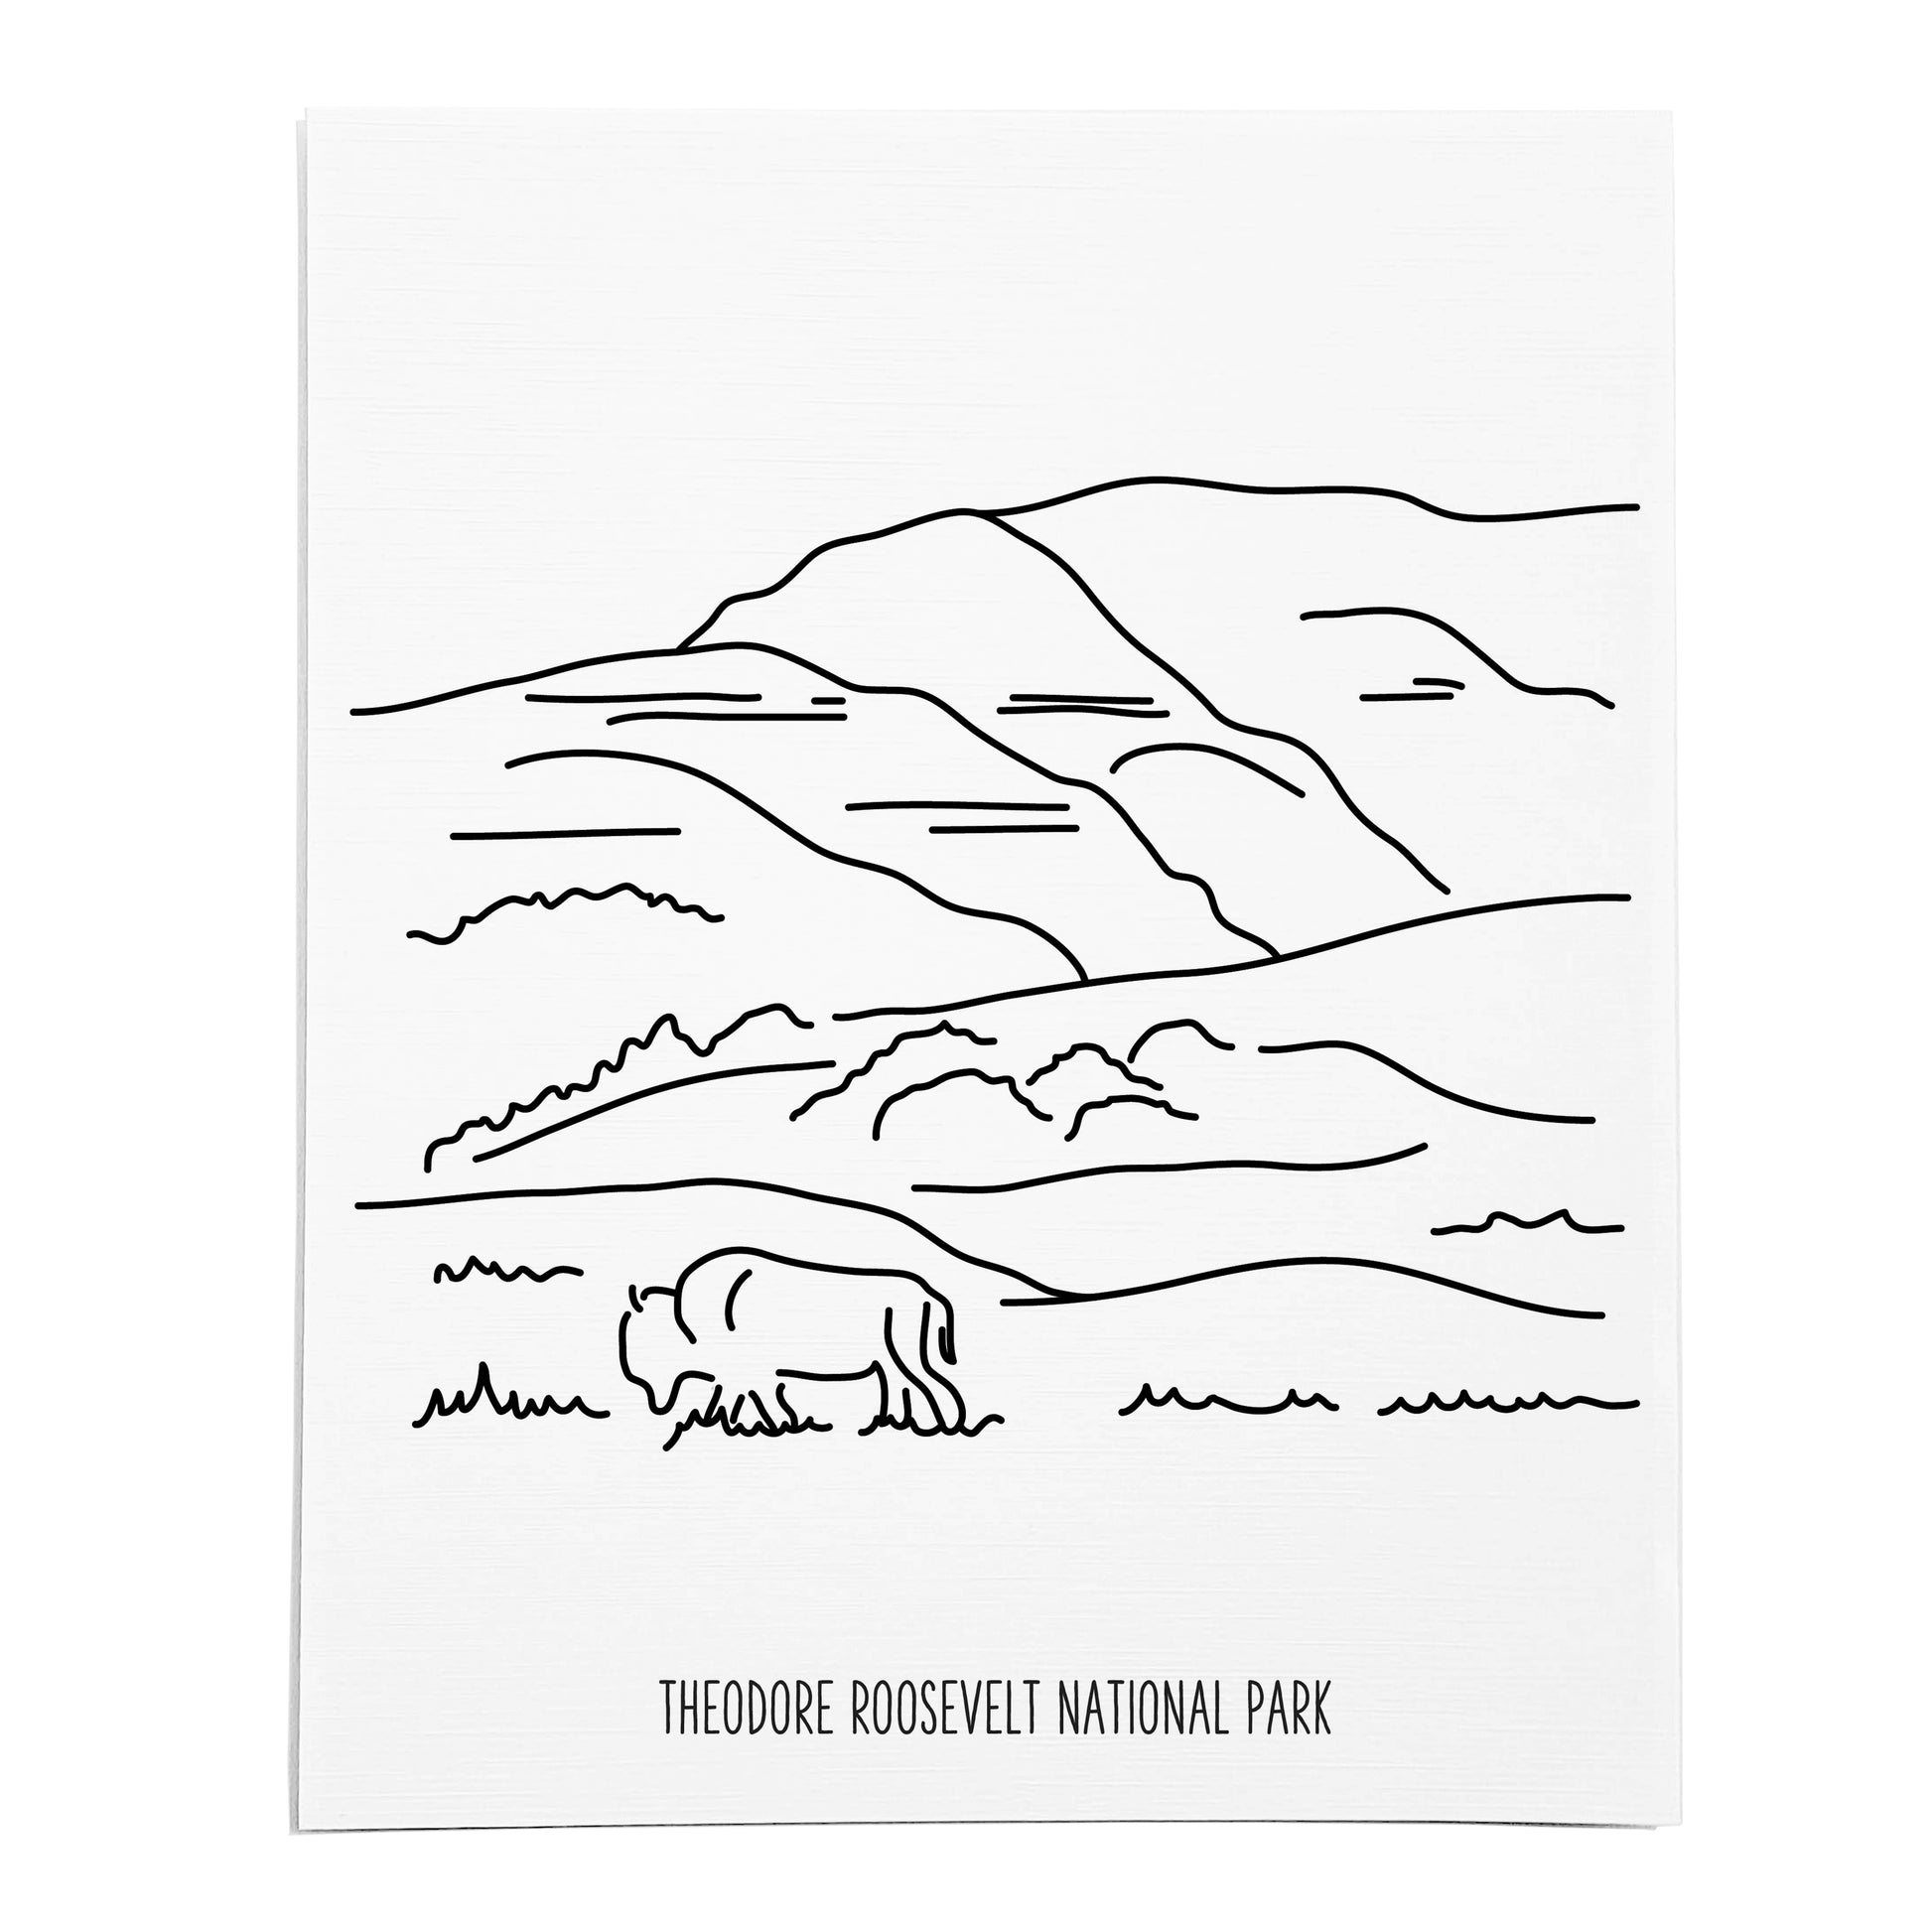 An art print featuring a line drawing of Theodore Roosevelt National Park on white linen paper